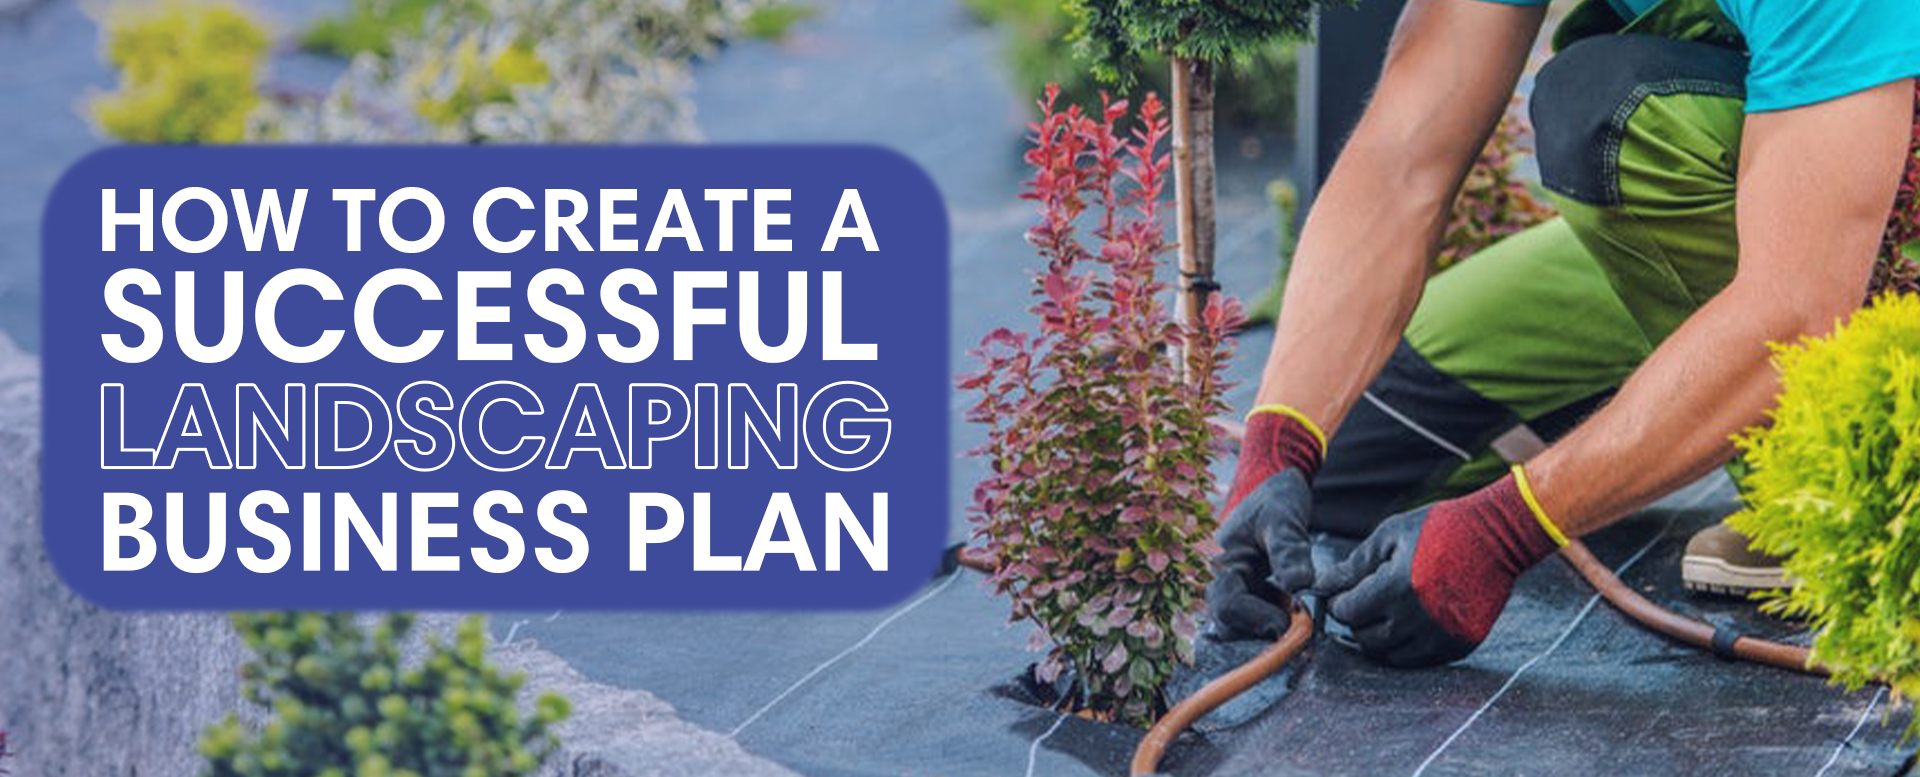 How to Create a Successful Landscaping Business Plan